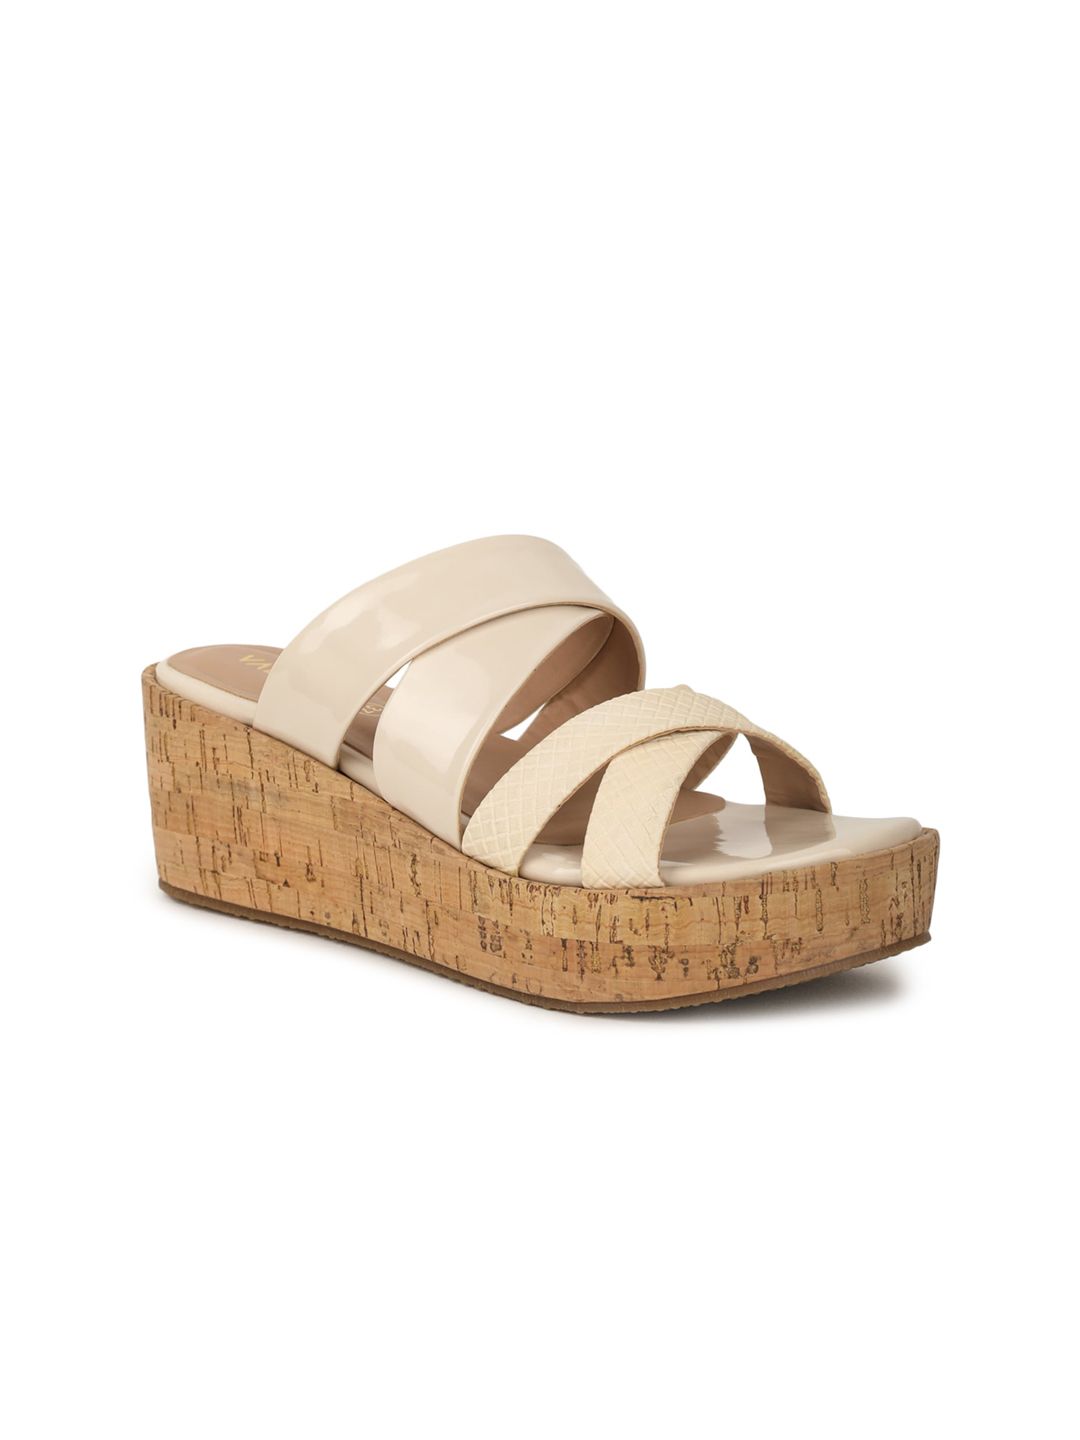 VALIOSAA Cream-Coloured Wedge Sandals with Buckles Price in India